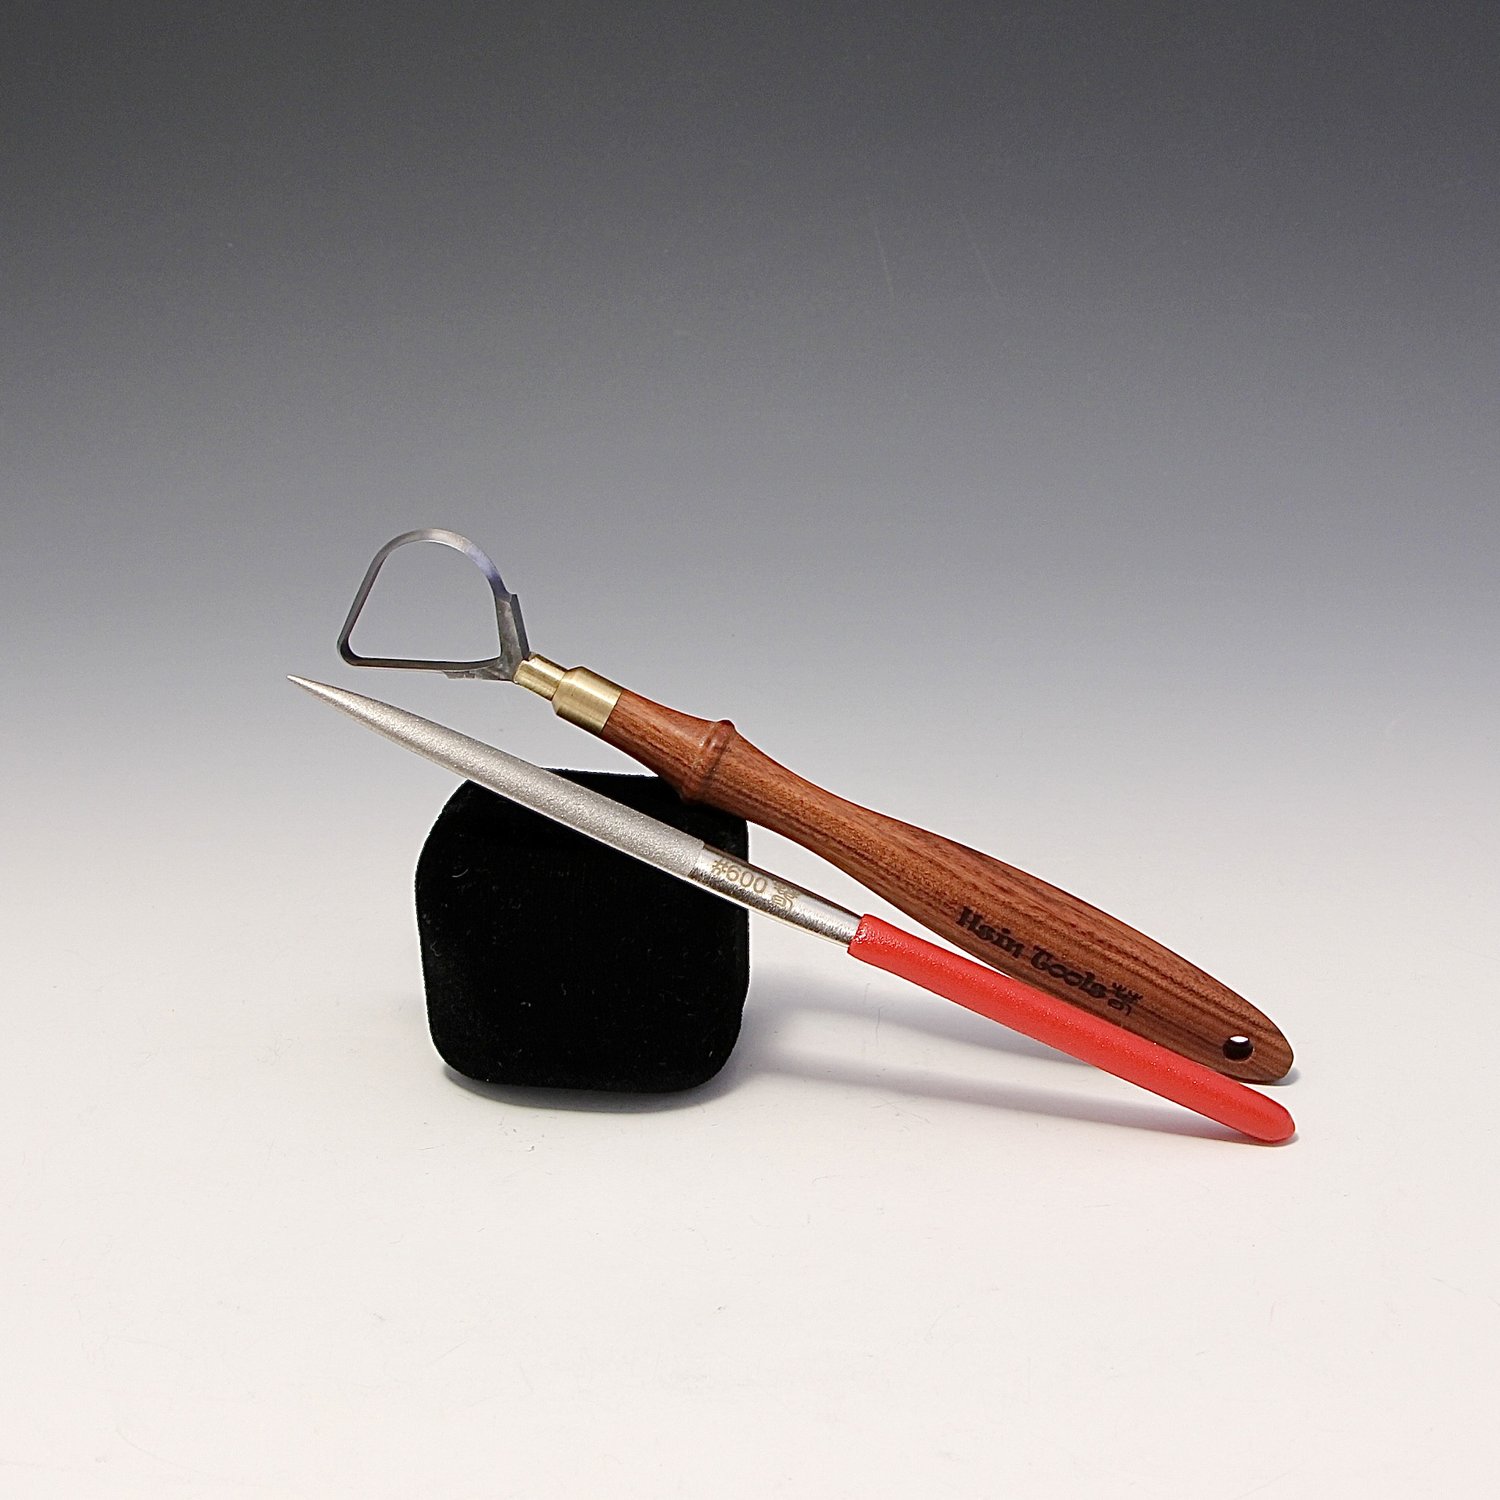 Pear-Shaped Tungsten Carbide Loop Tool with Large Walnut Wooden Handle~ The  Hardest Pottery Trimming Tool Designed by Hsin-Chuen Lin — Hsin-Chuen Lin  Ceramics & Tools